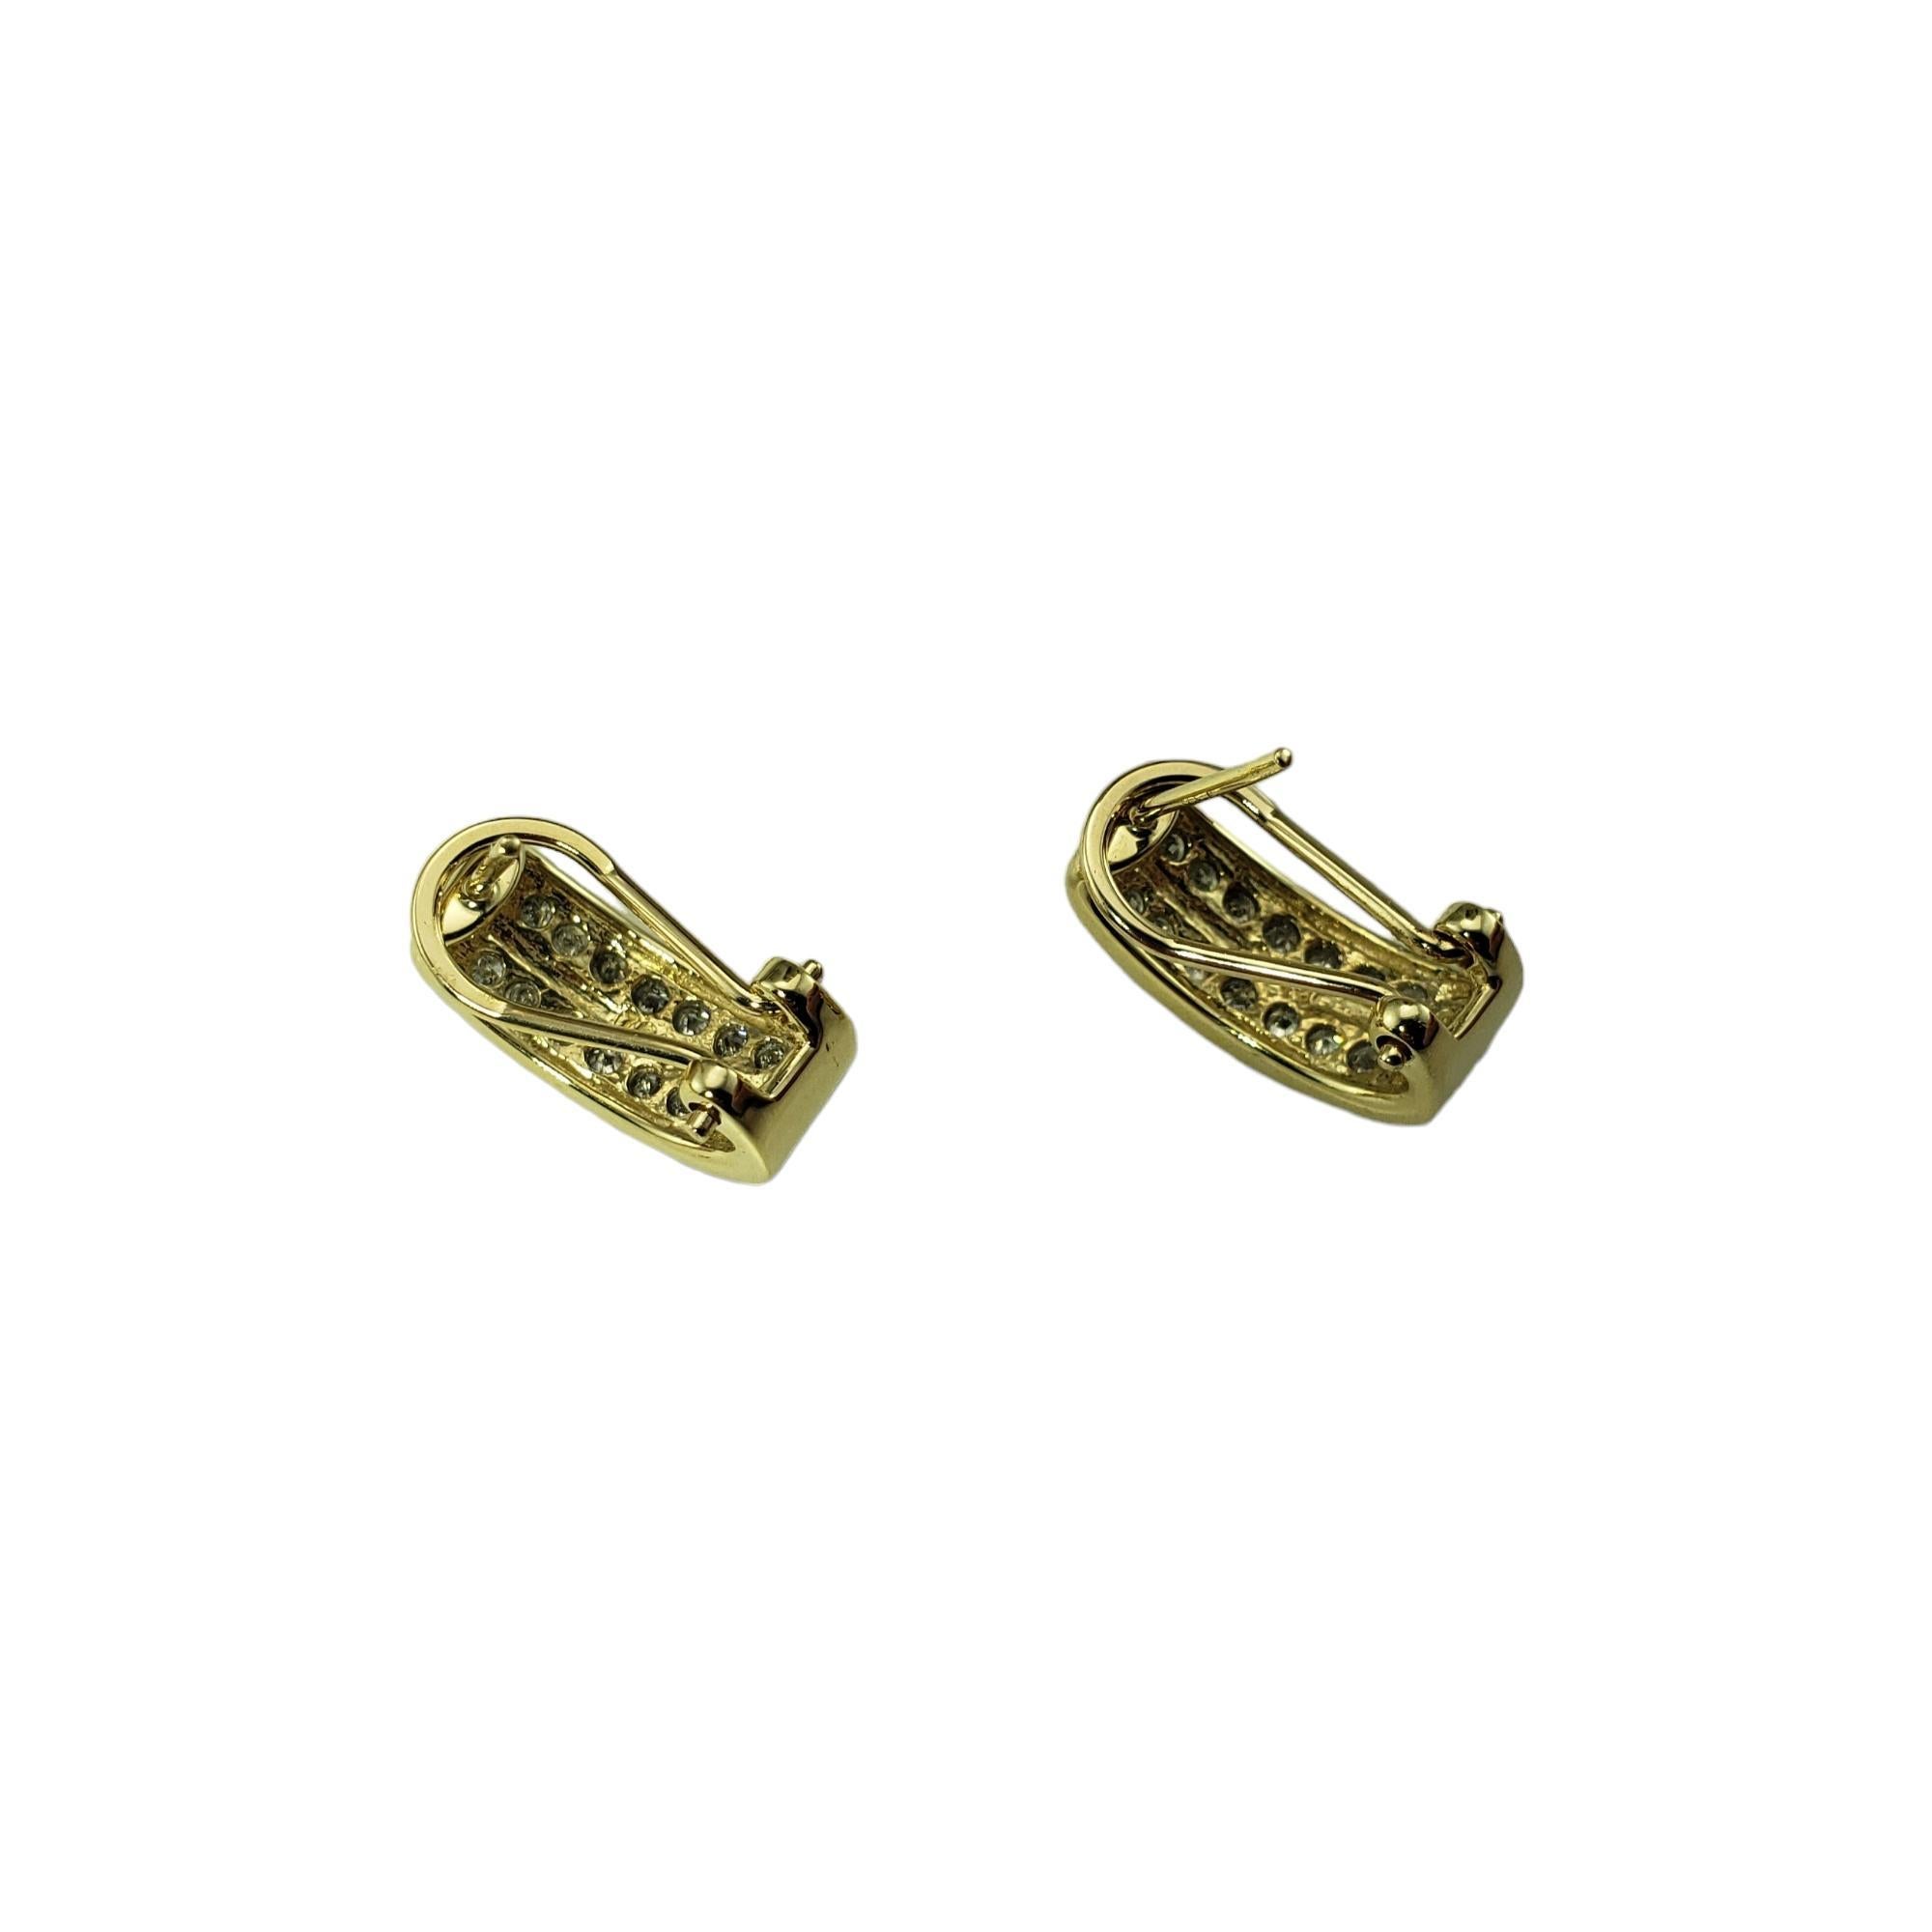  14 Karat Yellow Gold and Diamond Earrings #15496 For Sale 1